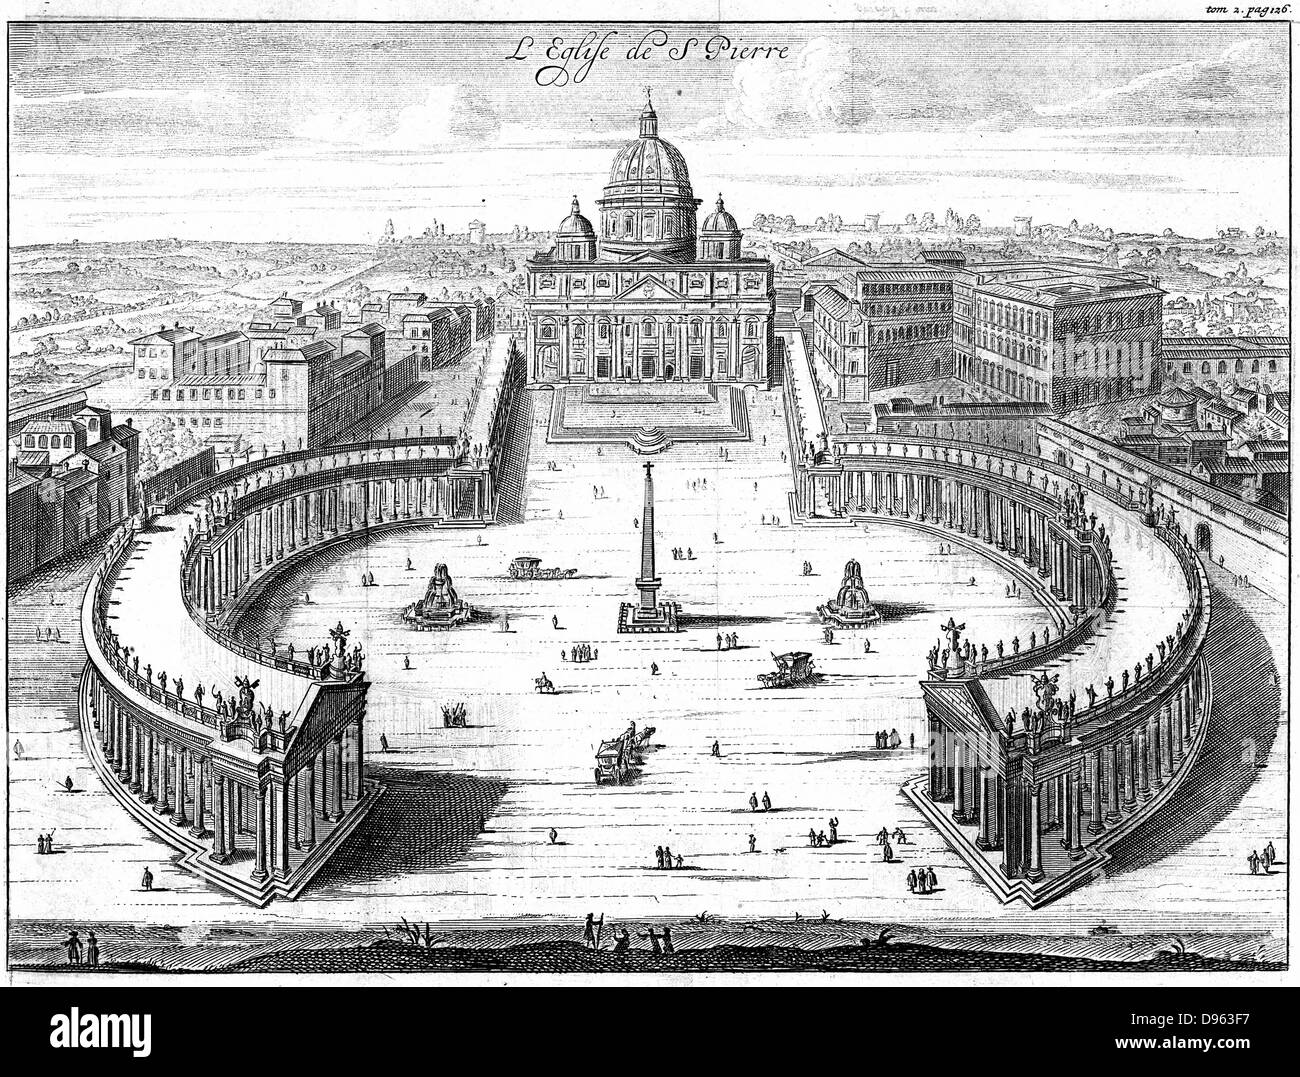 St Peter's Basilica, Rome, and the elliptical piazza and colonnades designed by Bernini (1598-1680). From 'Nouveau Voyage d'Italie', 1702. Copperplate engraving. Stock Photo